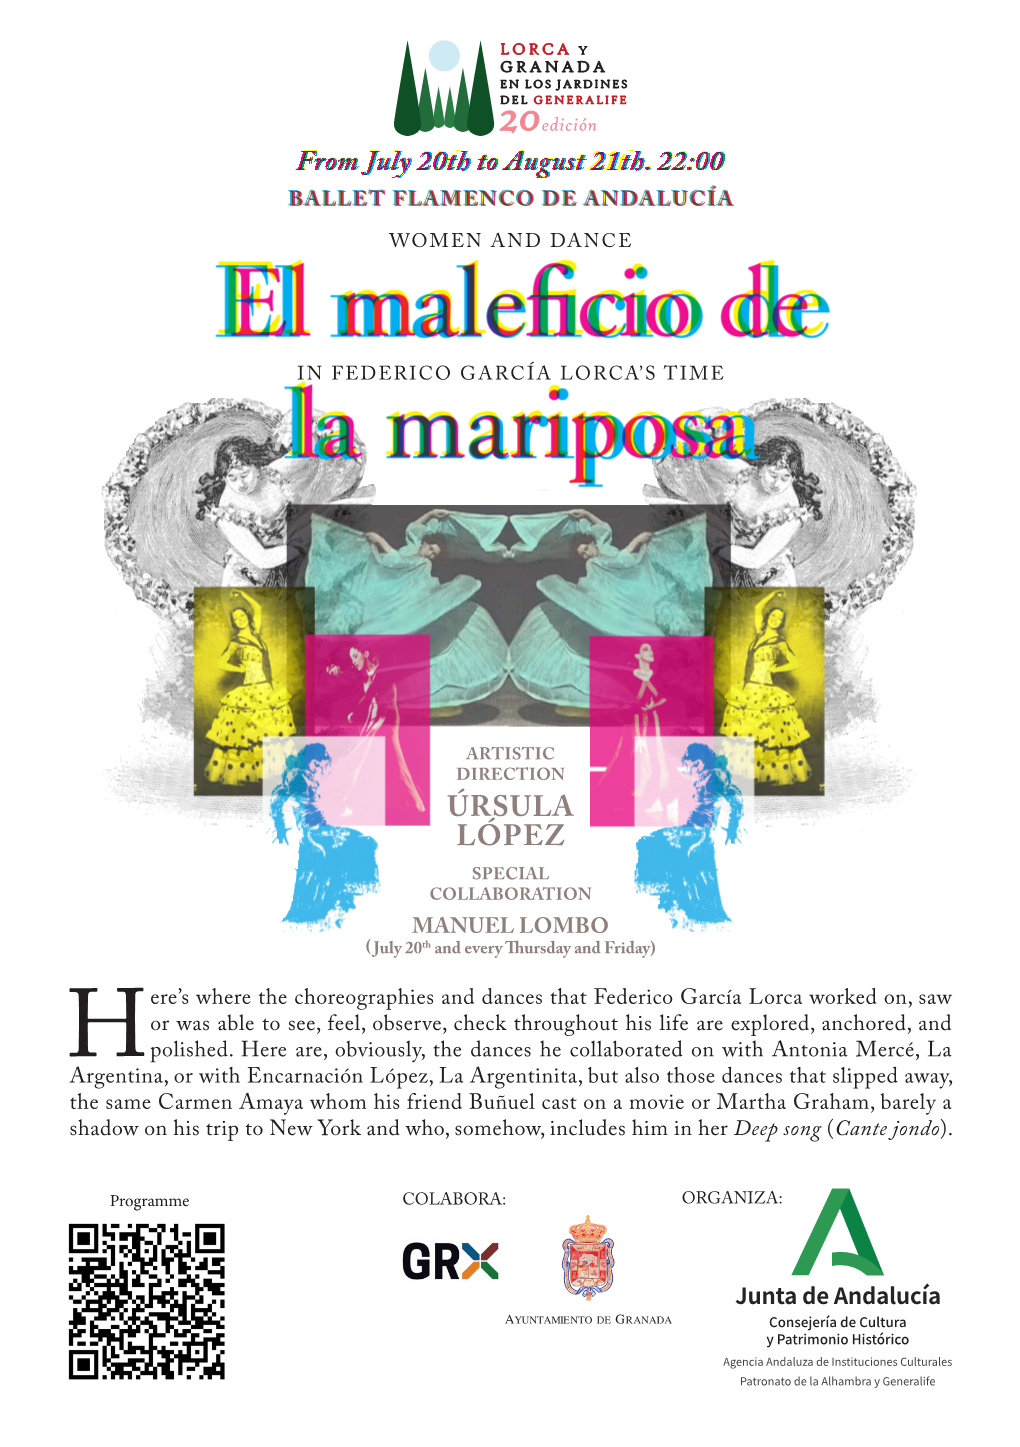 ÚRSULA LÓPEZ SPECIAL COLLABORATION MANUEL LOMBO ( July 20Th and Every Thursday and Friday)